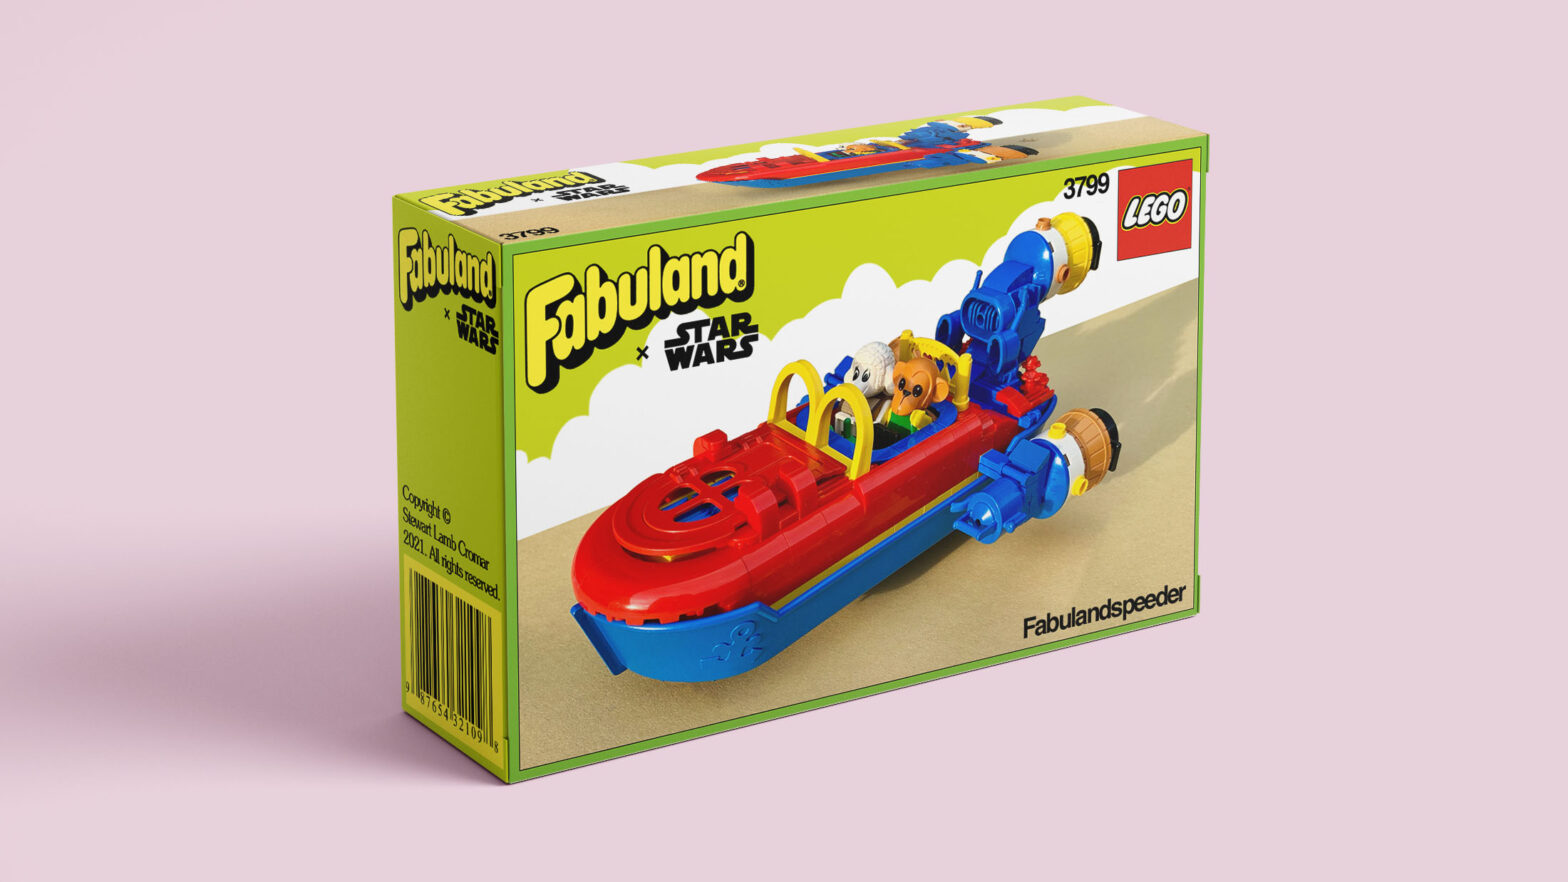 Cute yellow, red and blue hovercraft driven by lamb and monkey minifigures.